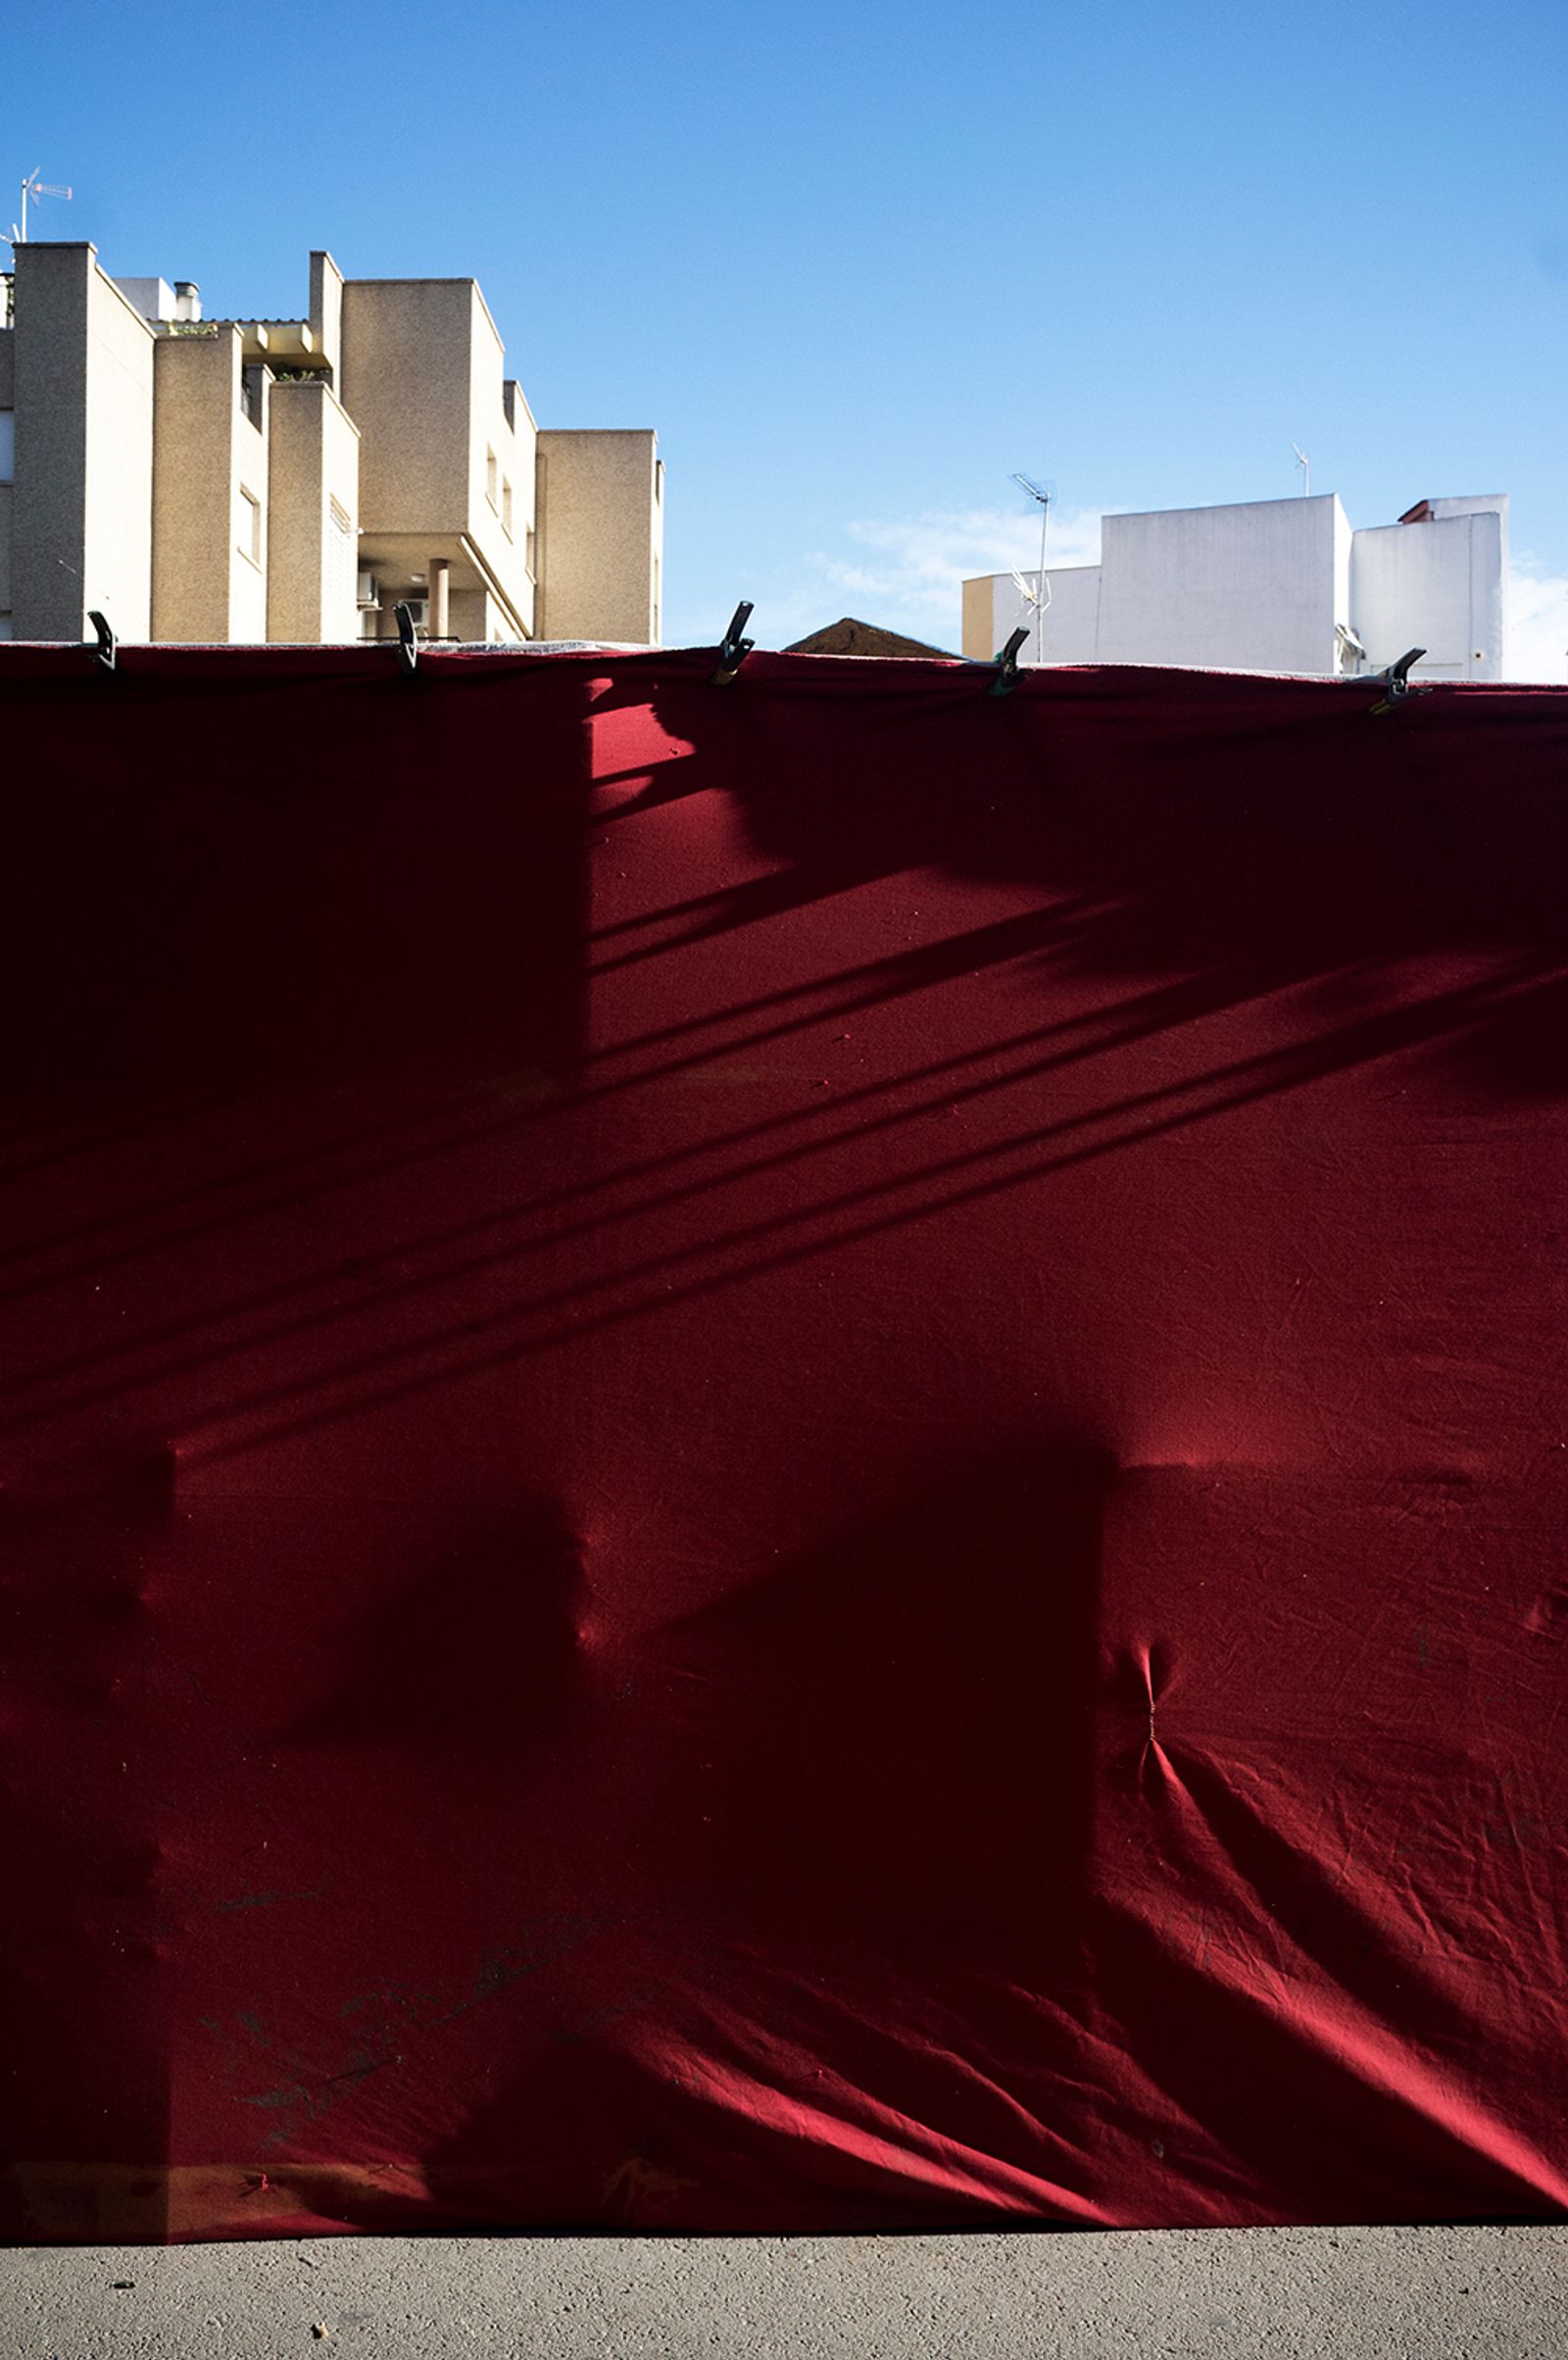 © David Salcedo - Image from the Fuchina: five days of the may photography project